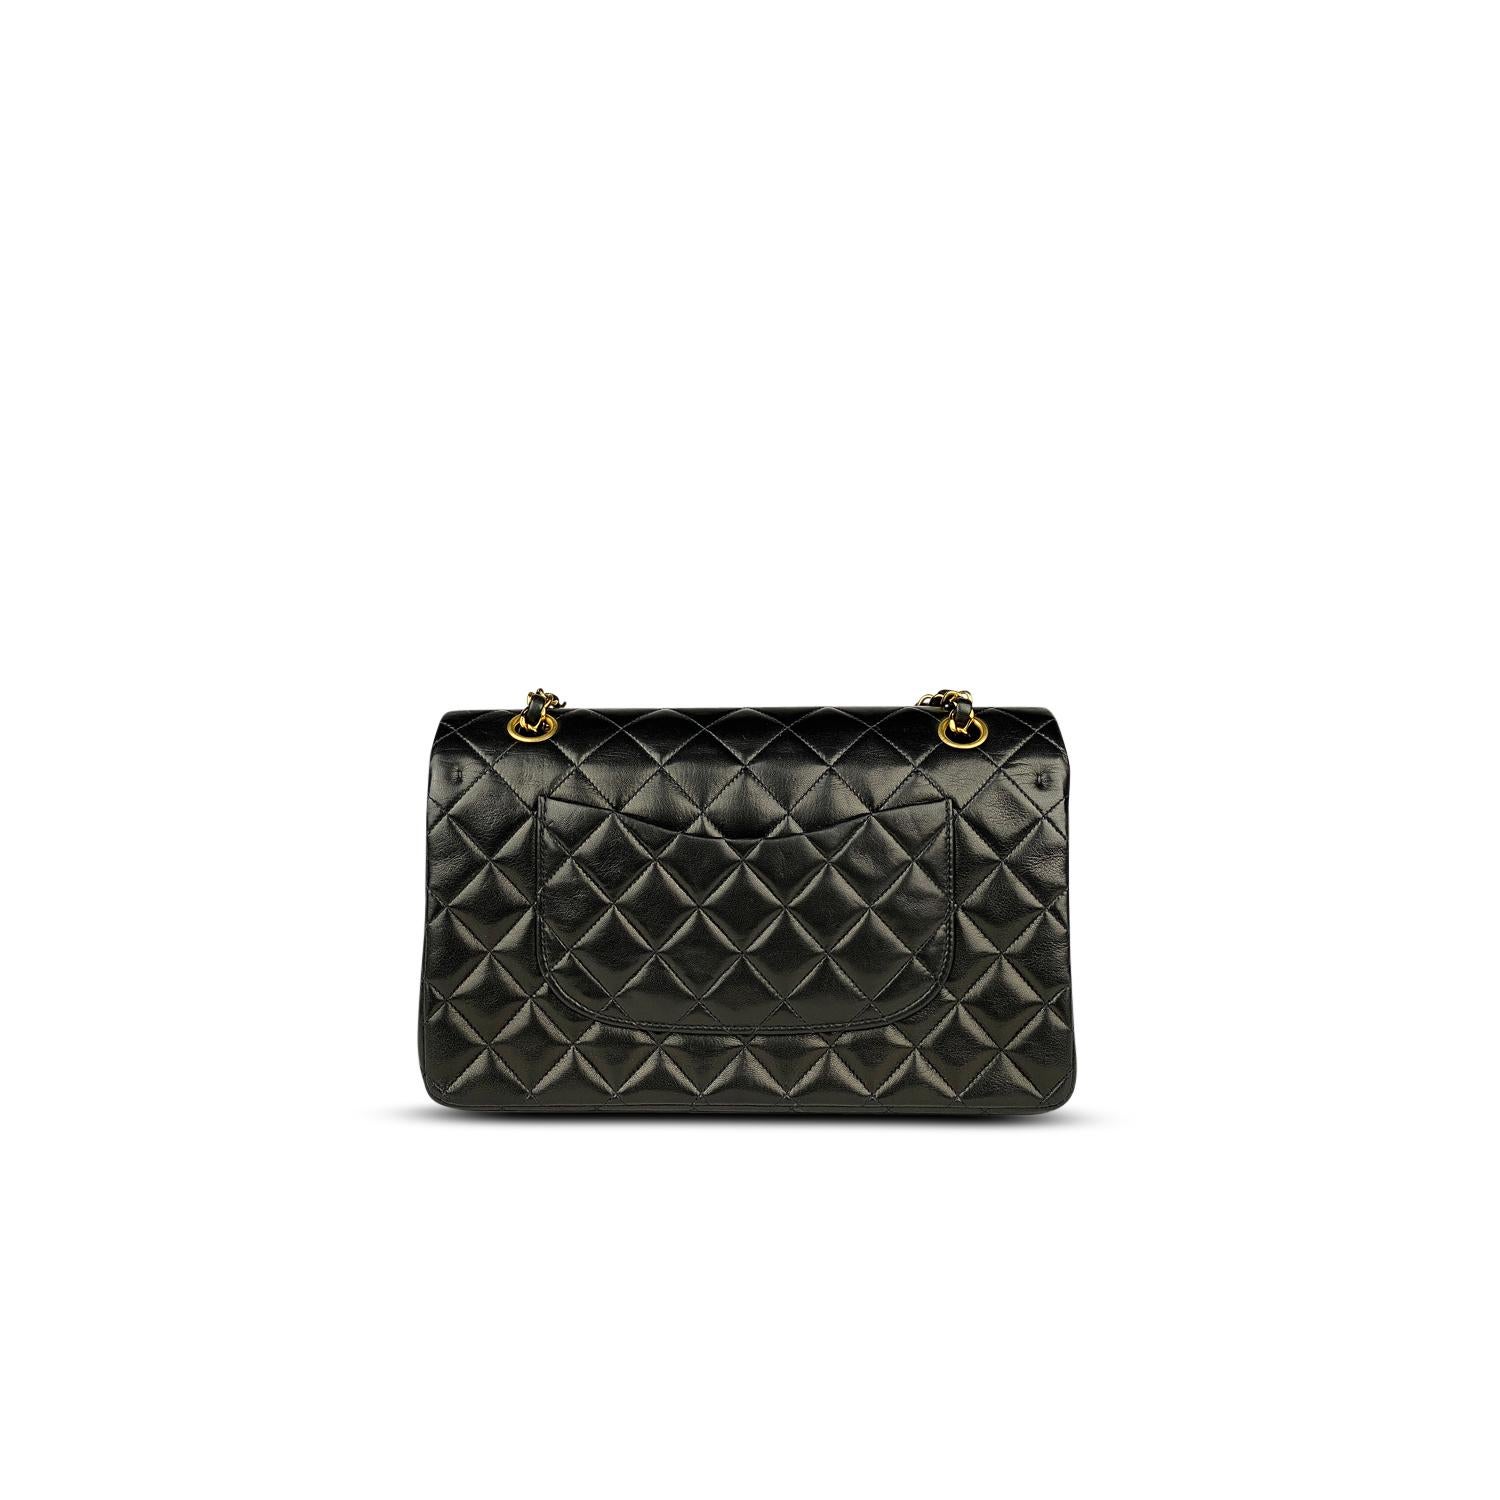 Chanel Medium Classic Double Flap Bag In Excellent Condition For Sale In Sundbyberg, SE